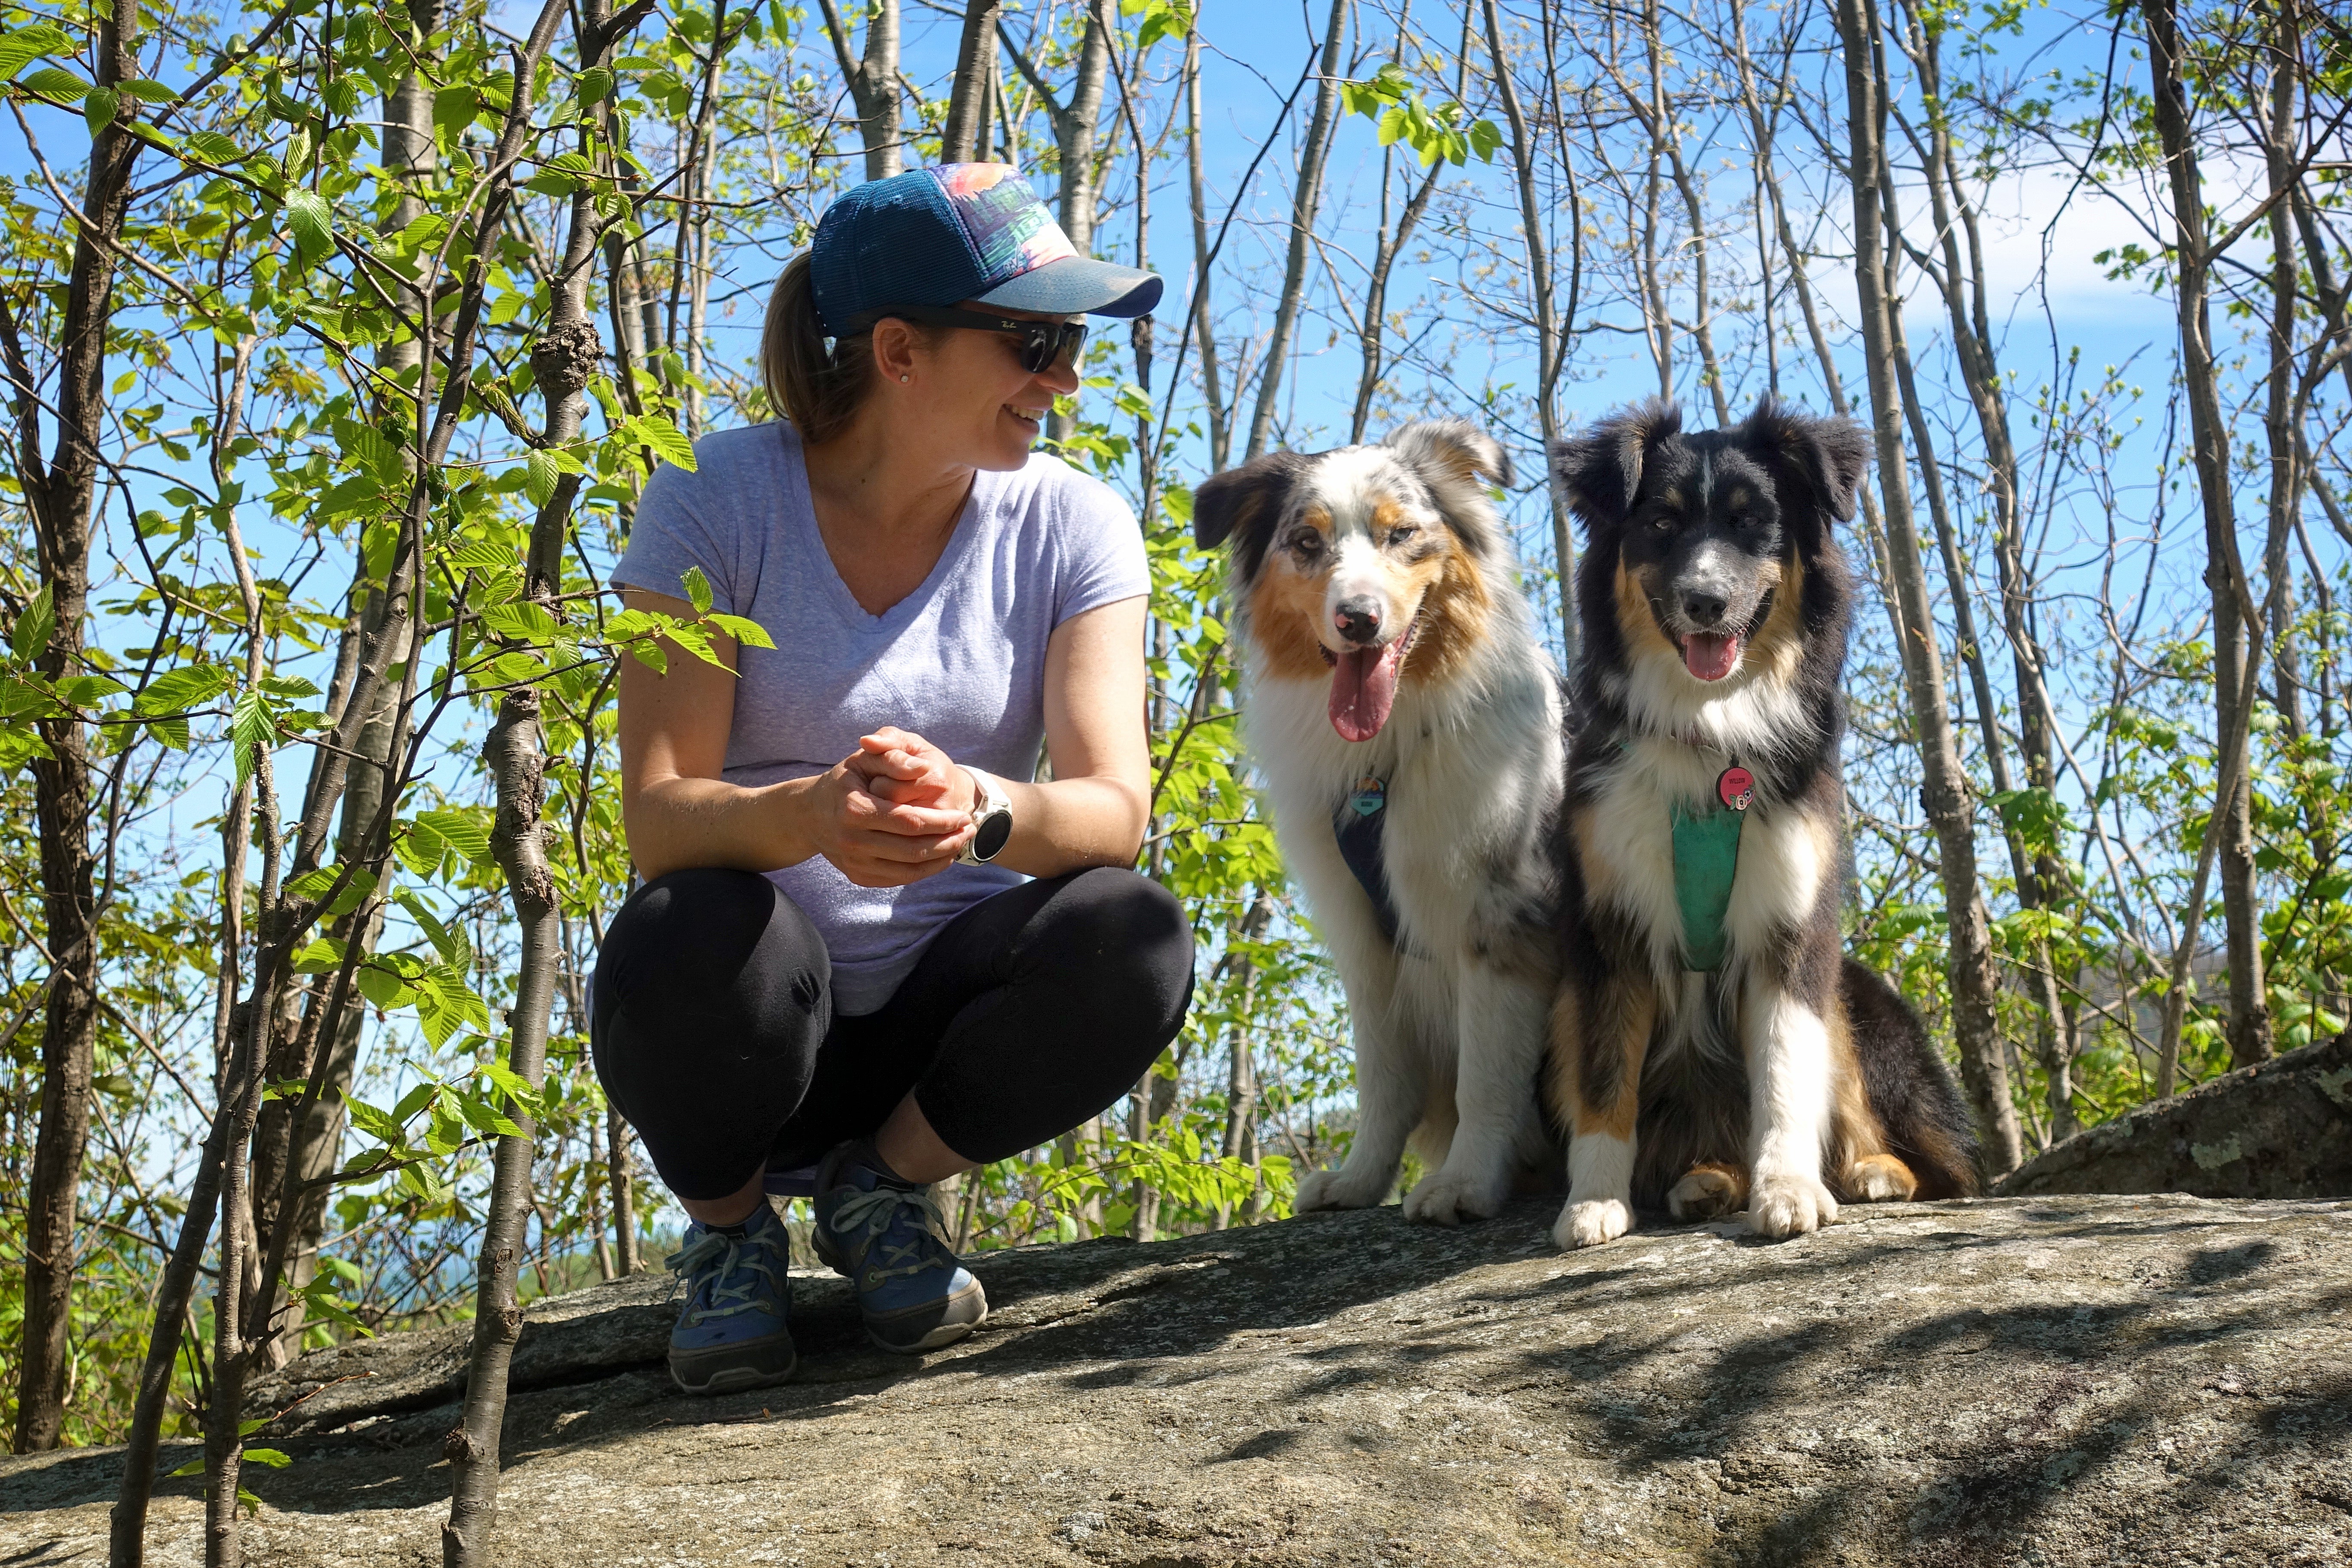 Maria in artist series trucker hat with her two australian shepherds in front range harnesses sitting next to each other on a big rock slab outdoors..